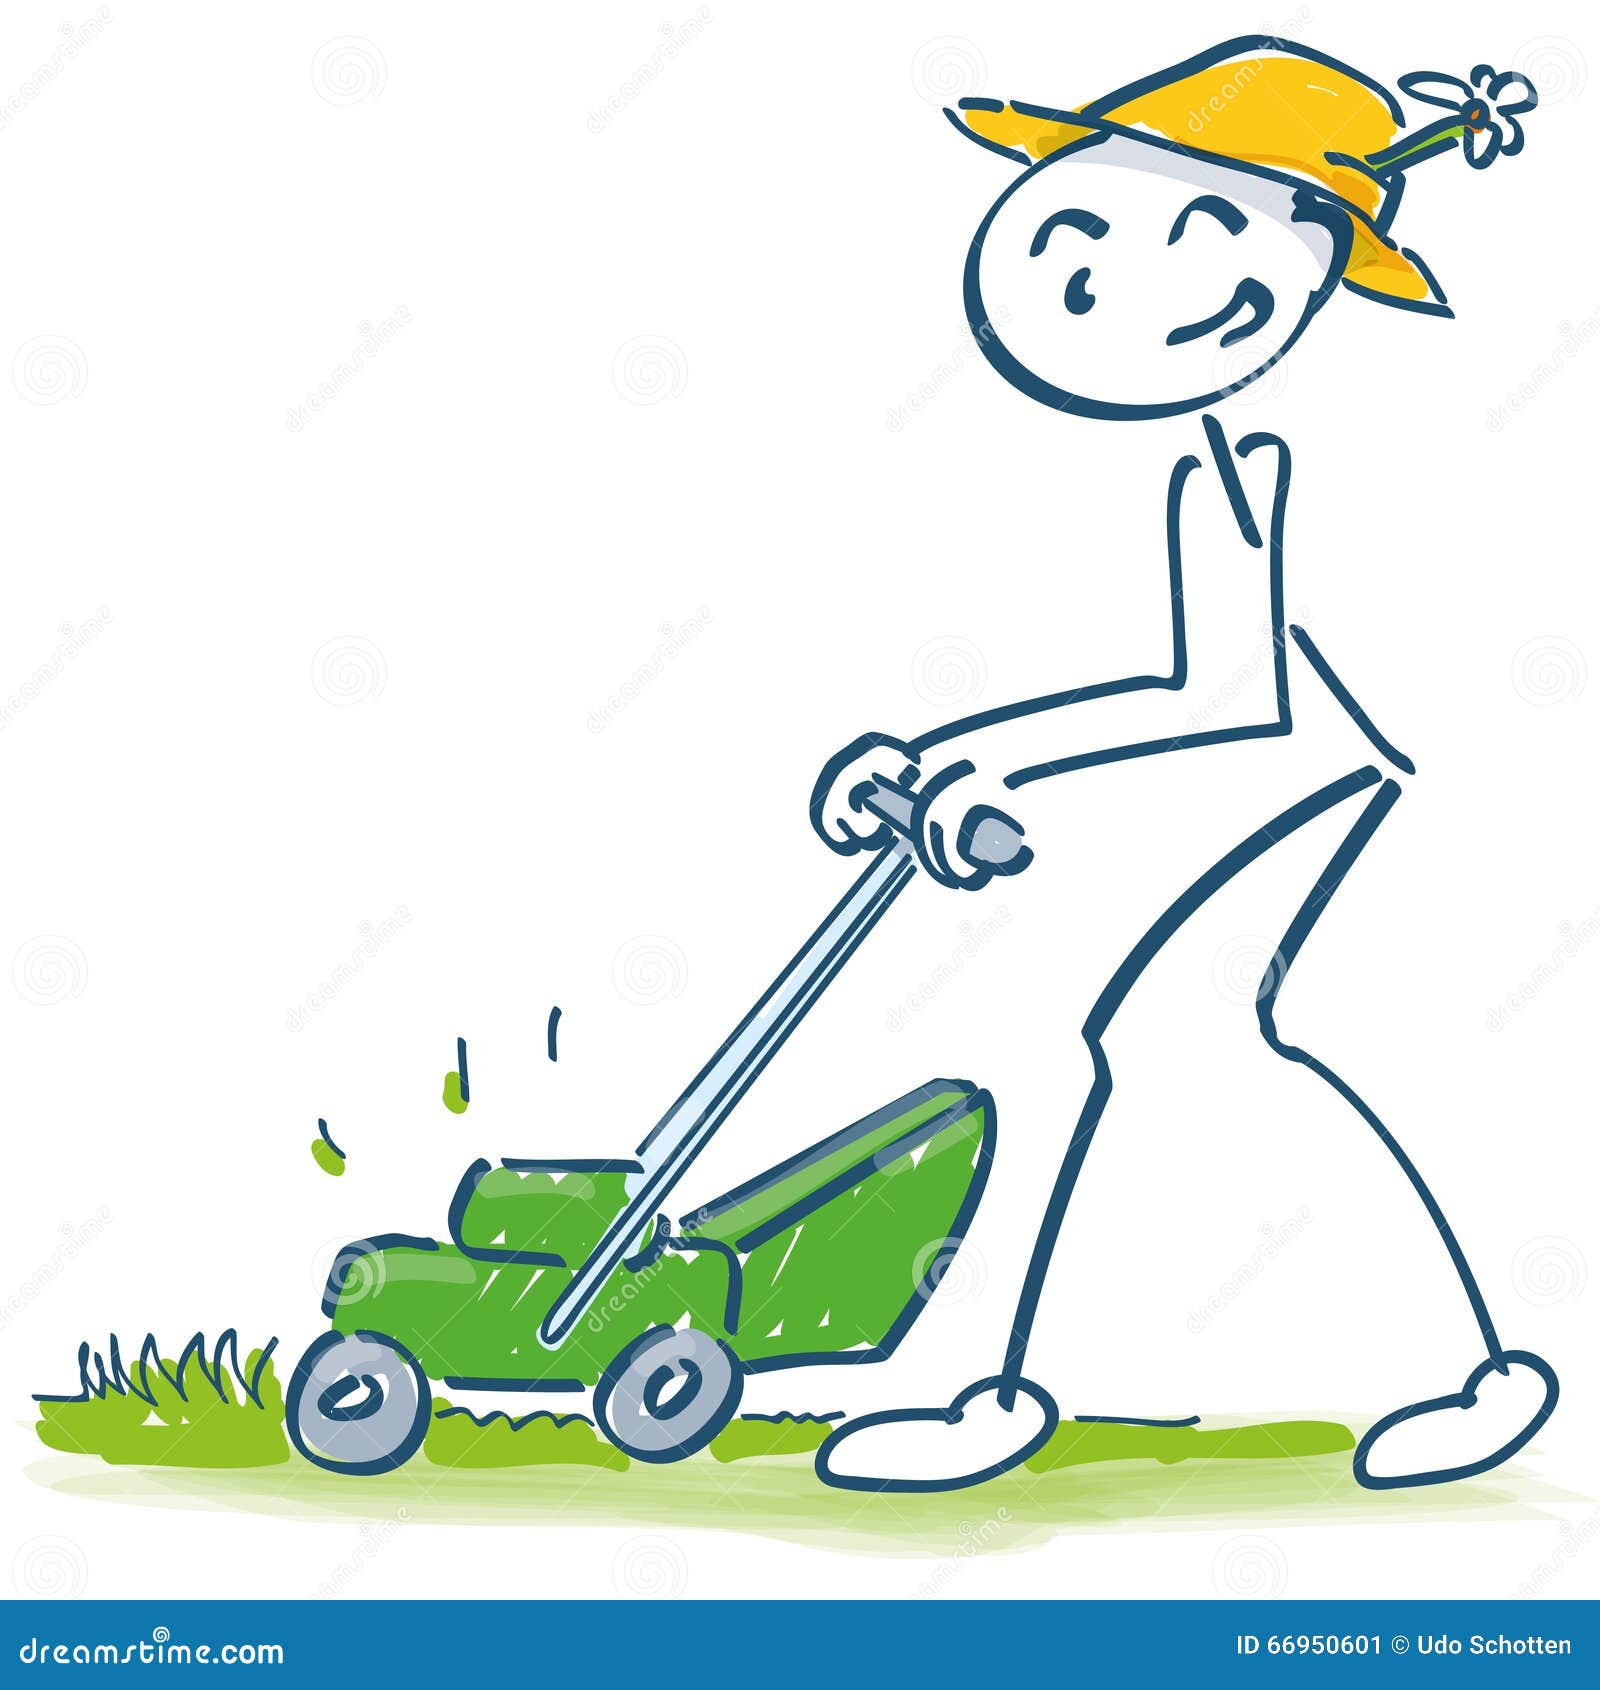 Lawn mowing business plan